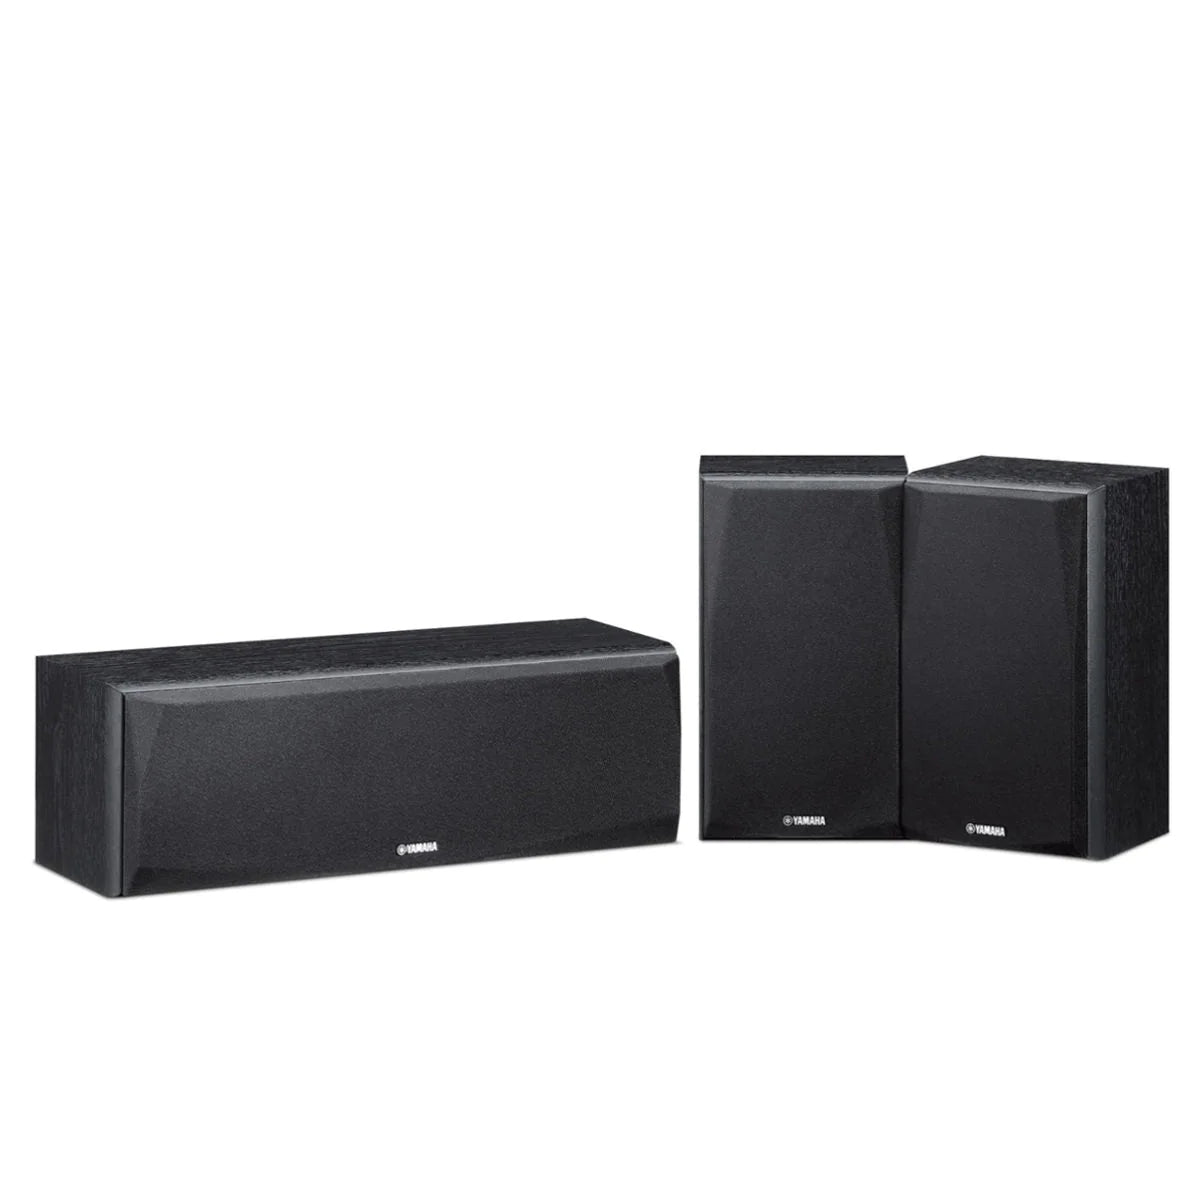 Yamaha NS-P51 Home Theater Speaker Package